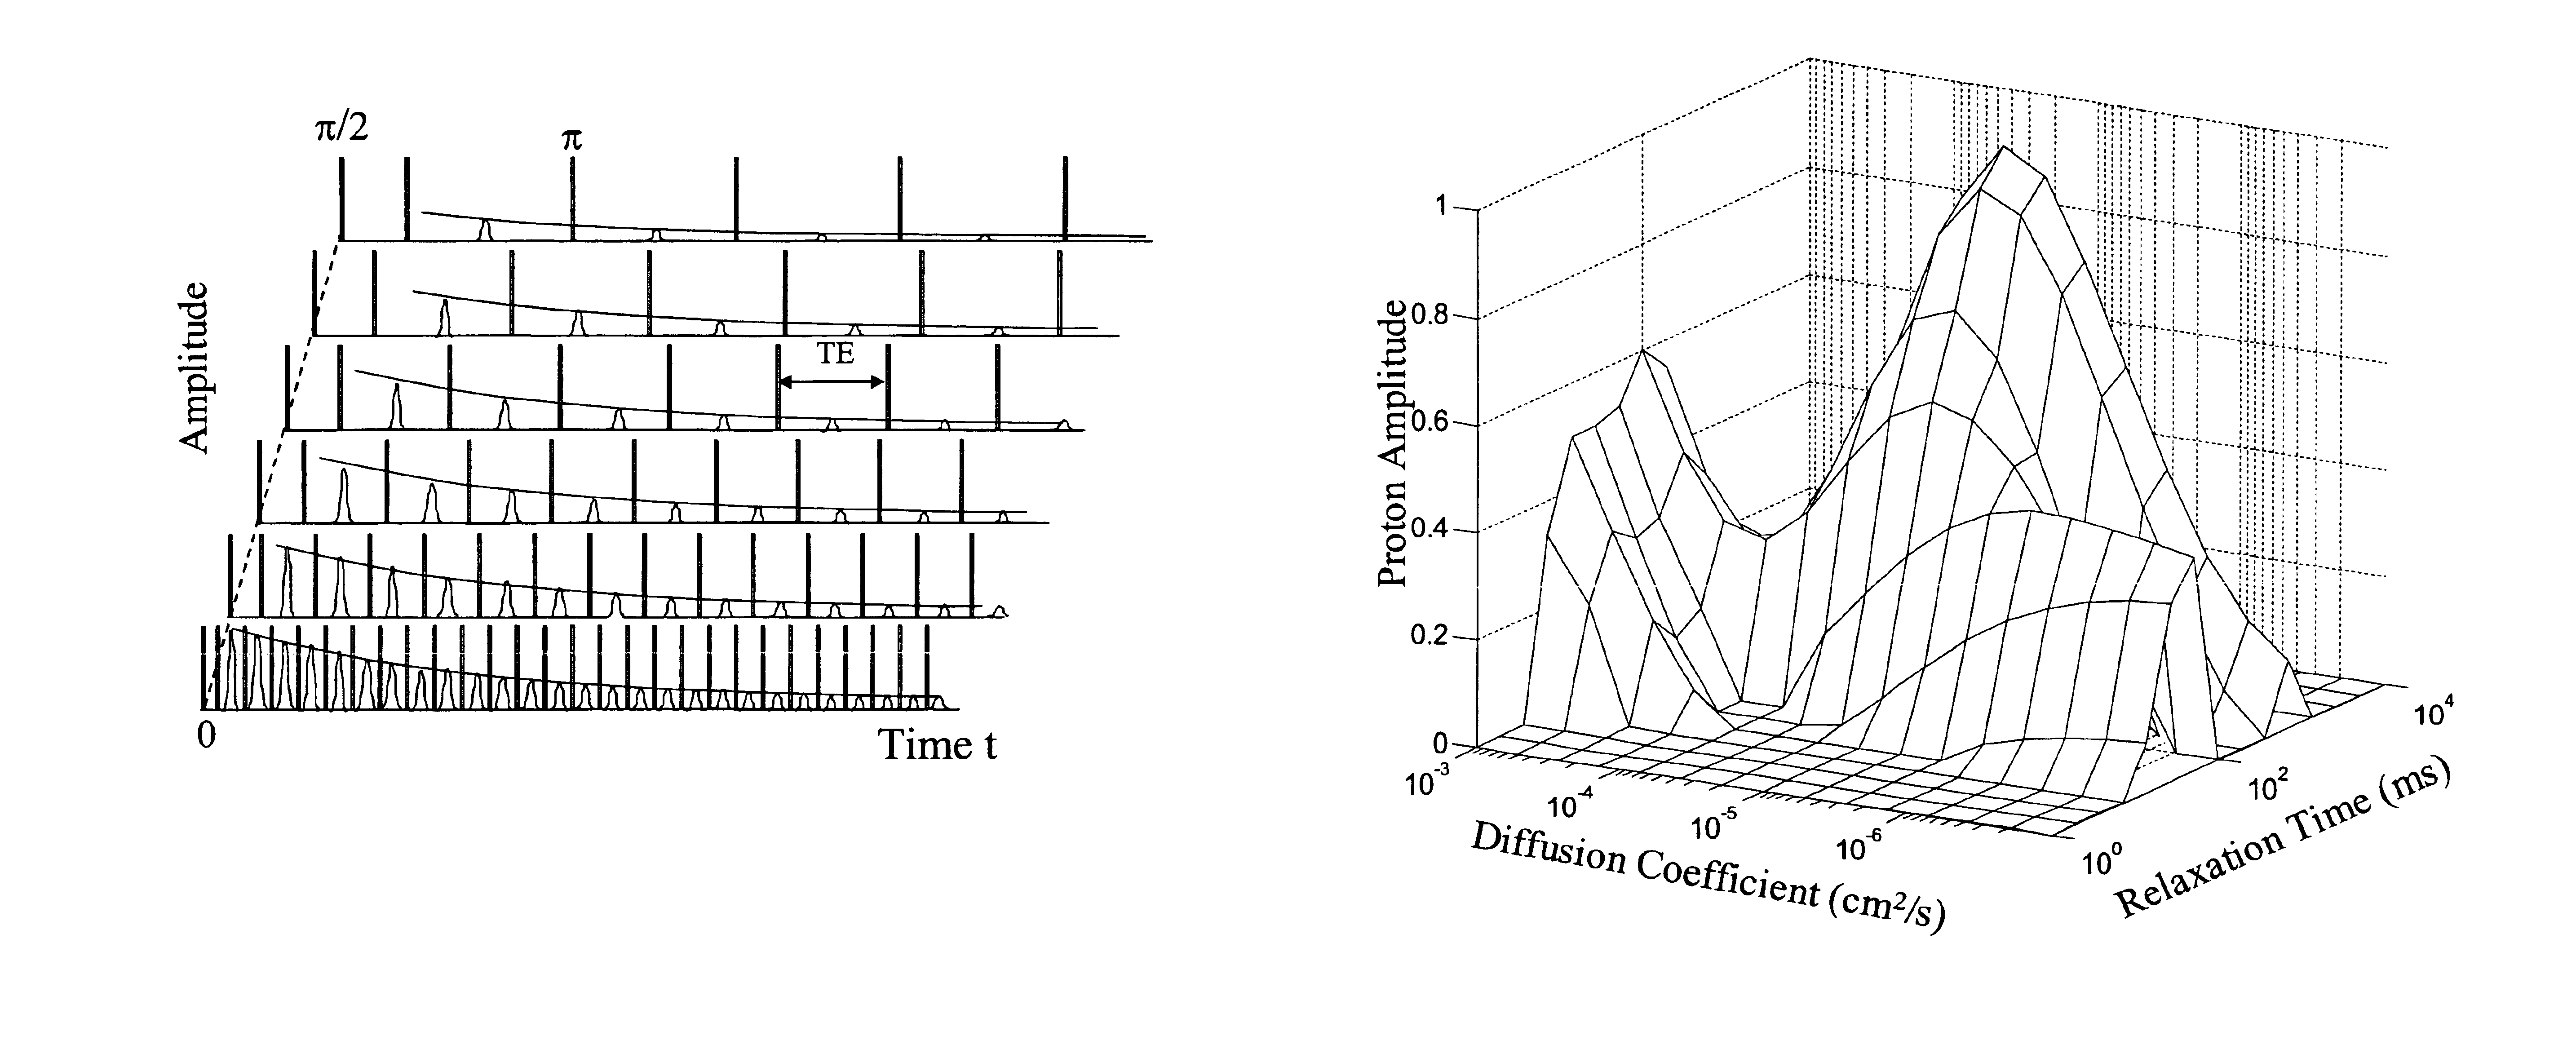 Method for obtaining multi-dimensional proton density distributions from a system of nuclear spins